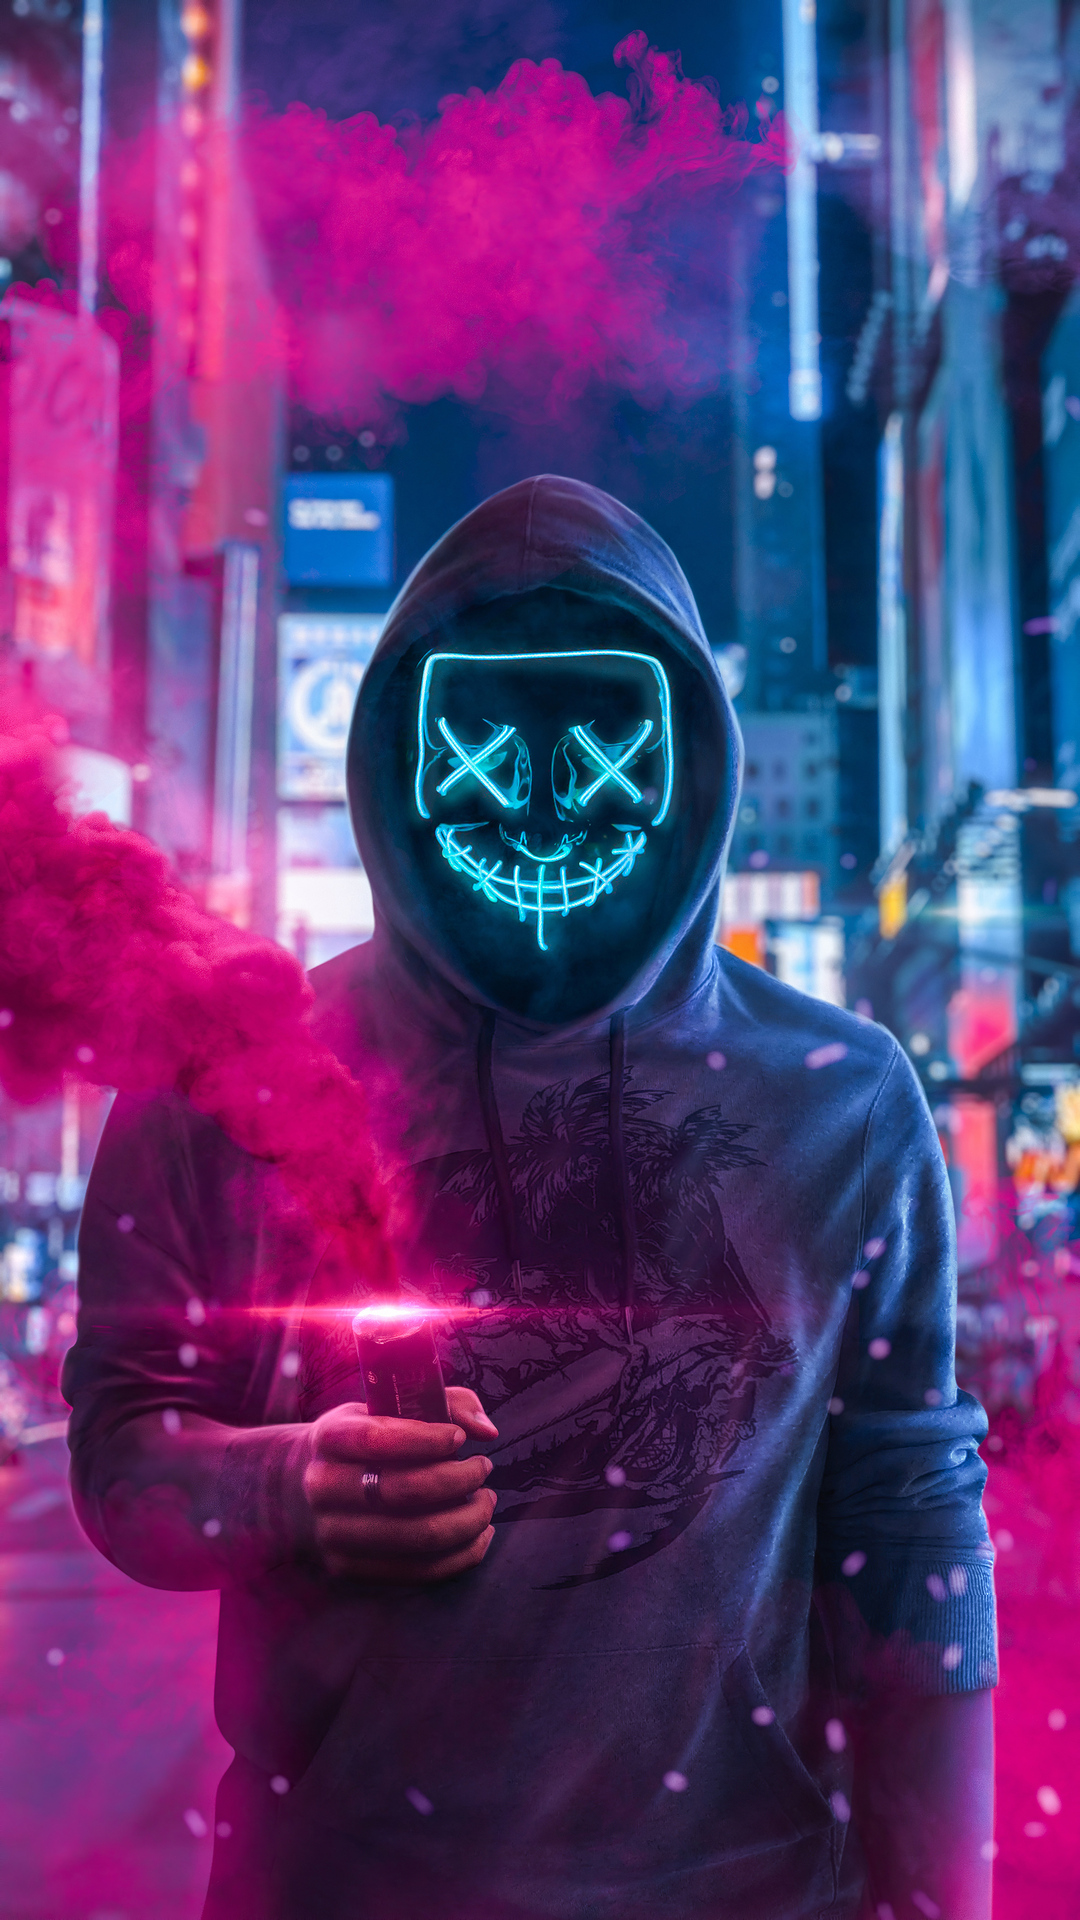 1080x1920 Mask Guy With Smoke Bomb In Hand 4k Iphone 7,6s,6 Plus, Pixel ...